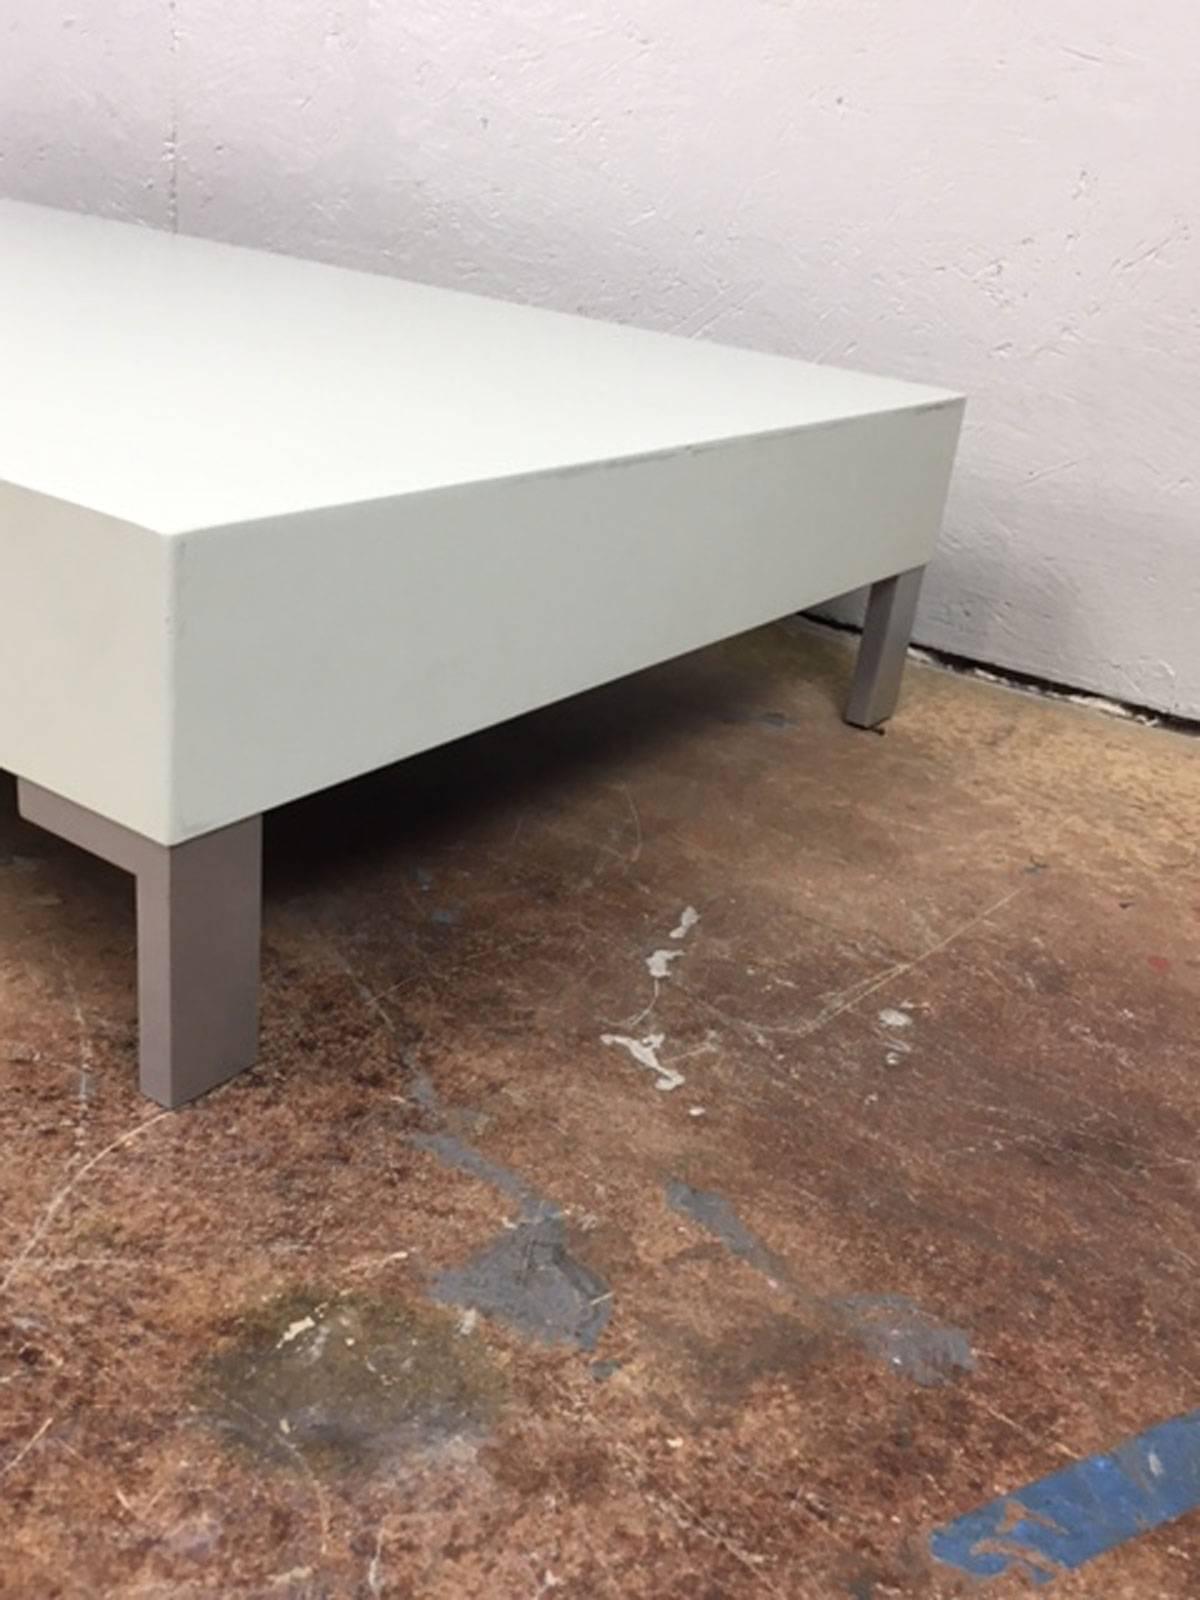 Low Coffee Table or Sculpture Display Table In Excellent Condition For Sale In Phoenix, AZ